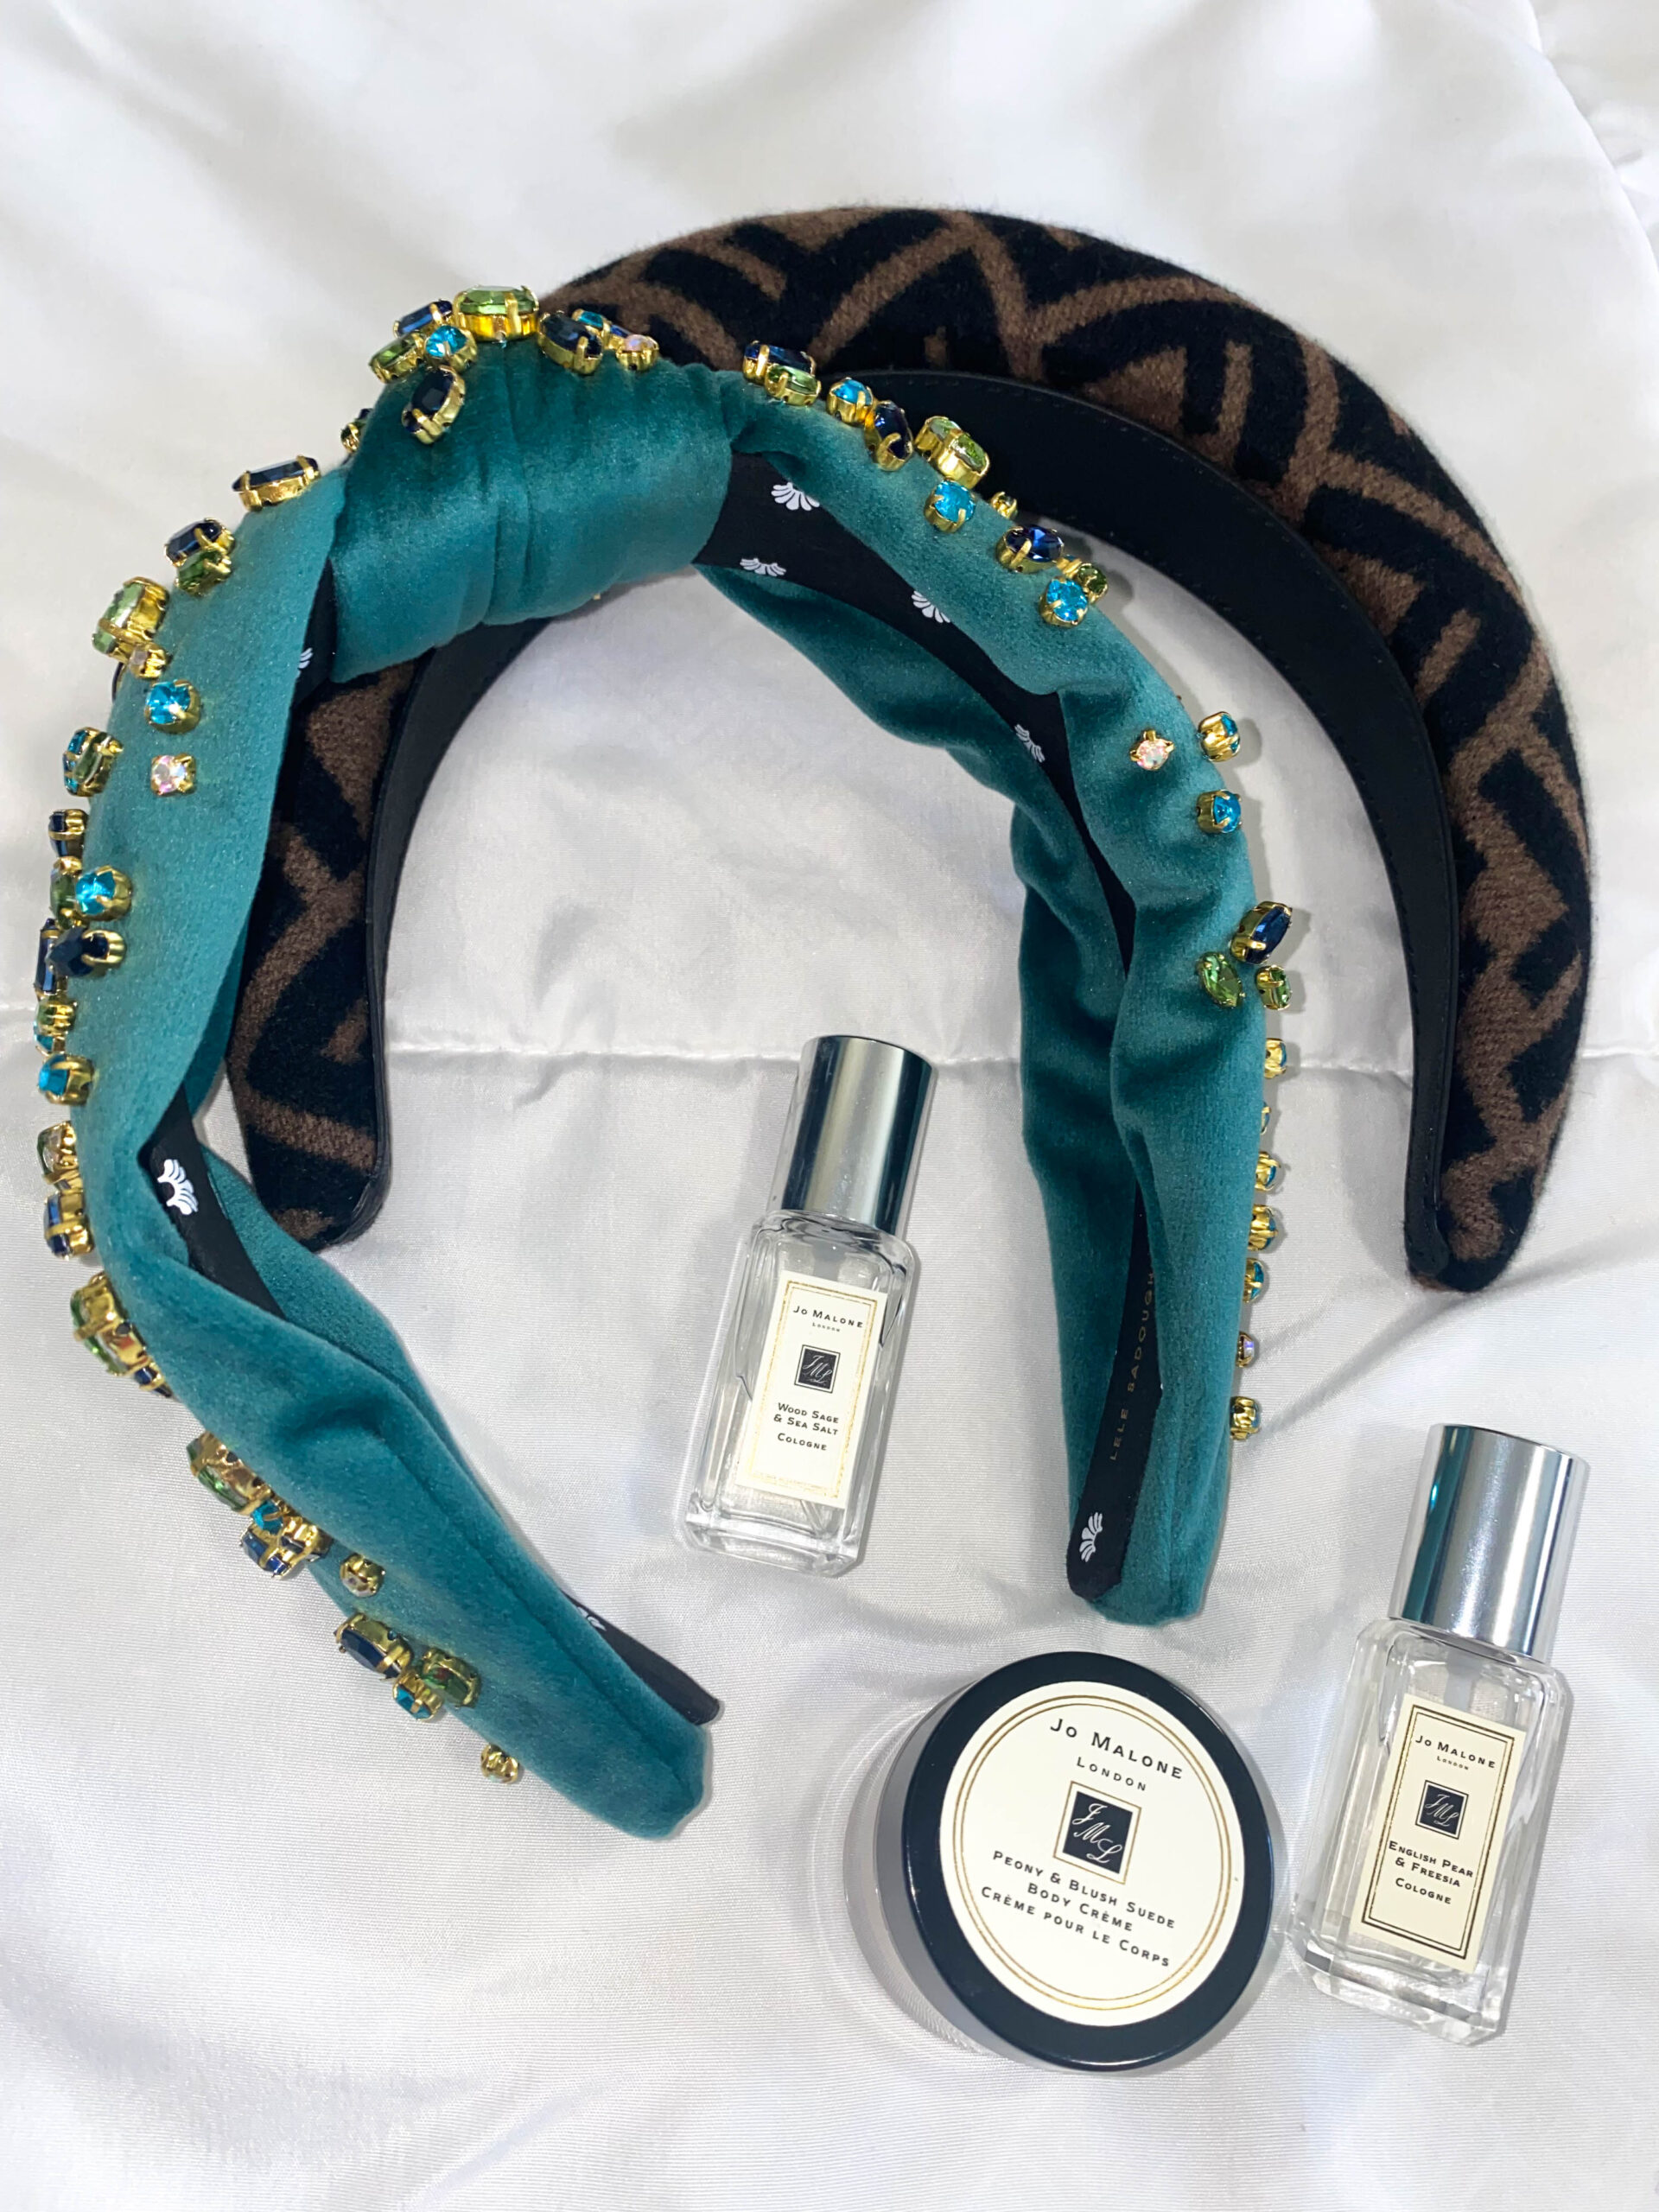 THE LITTLE STYLE DETAILS – HEADBANDS & PERFUME